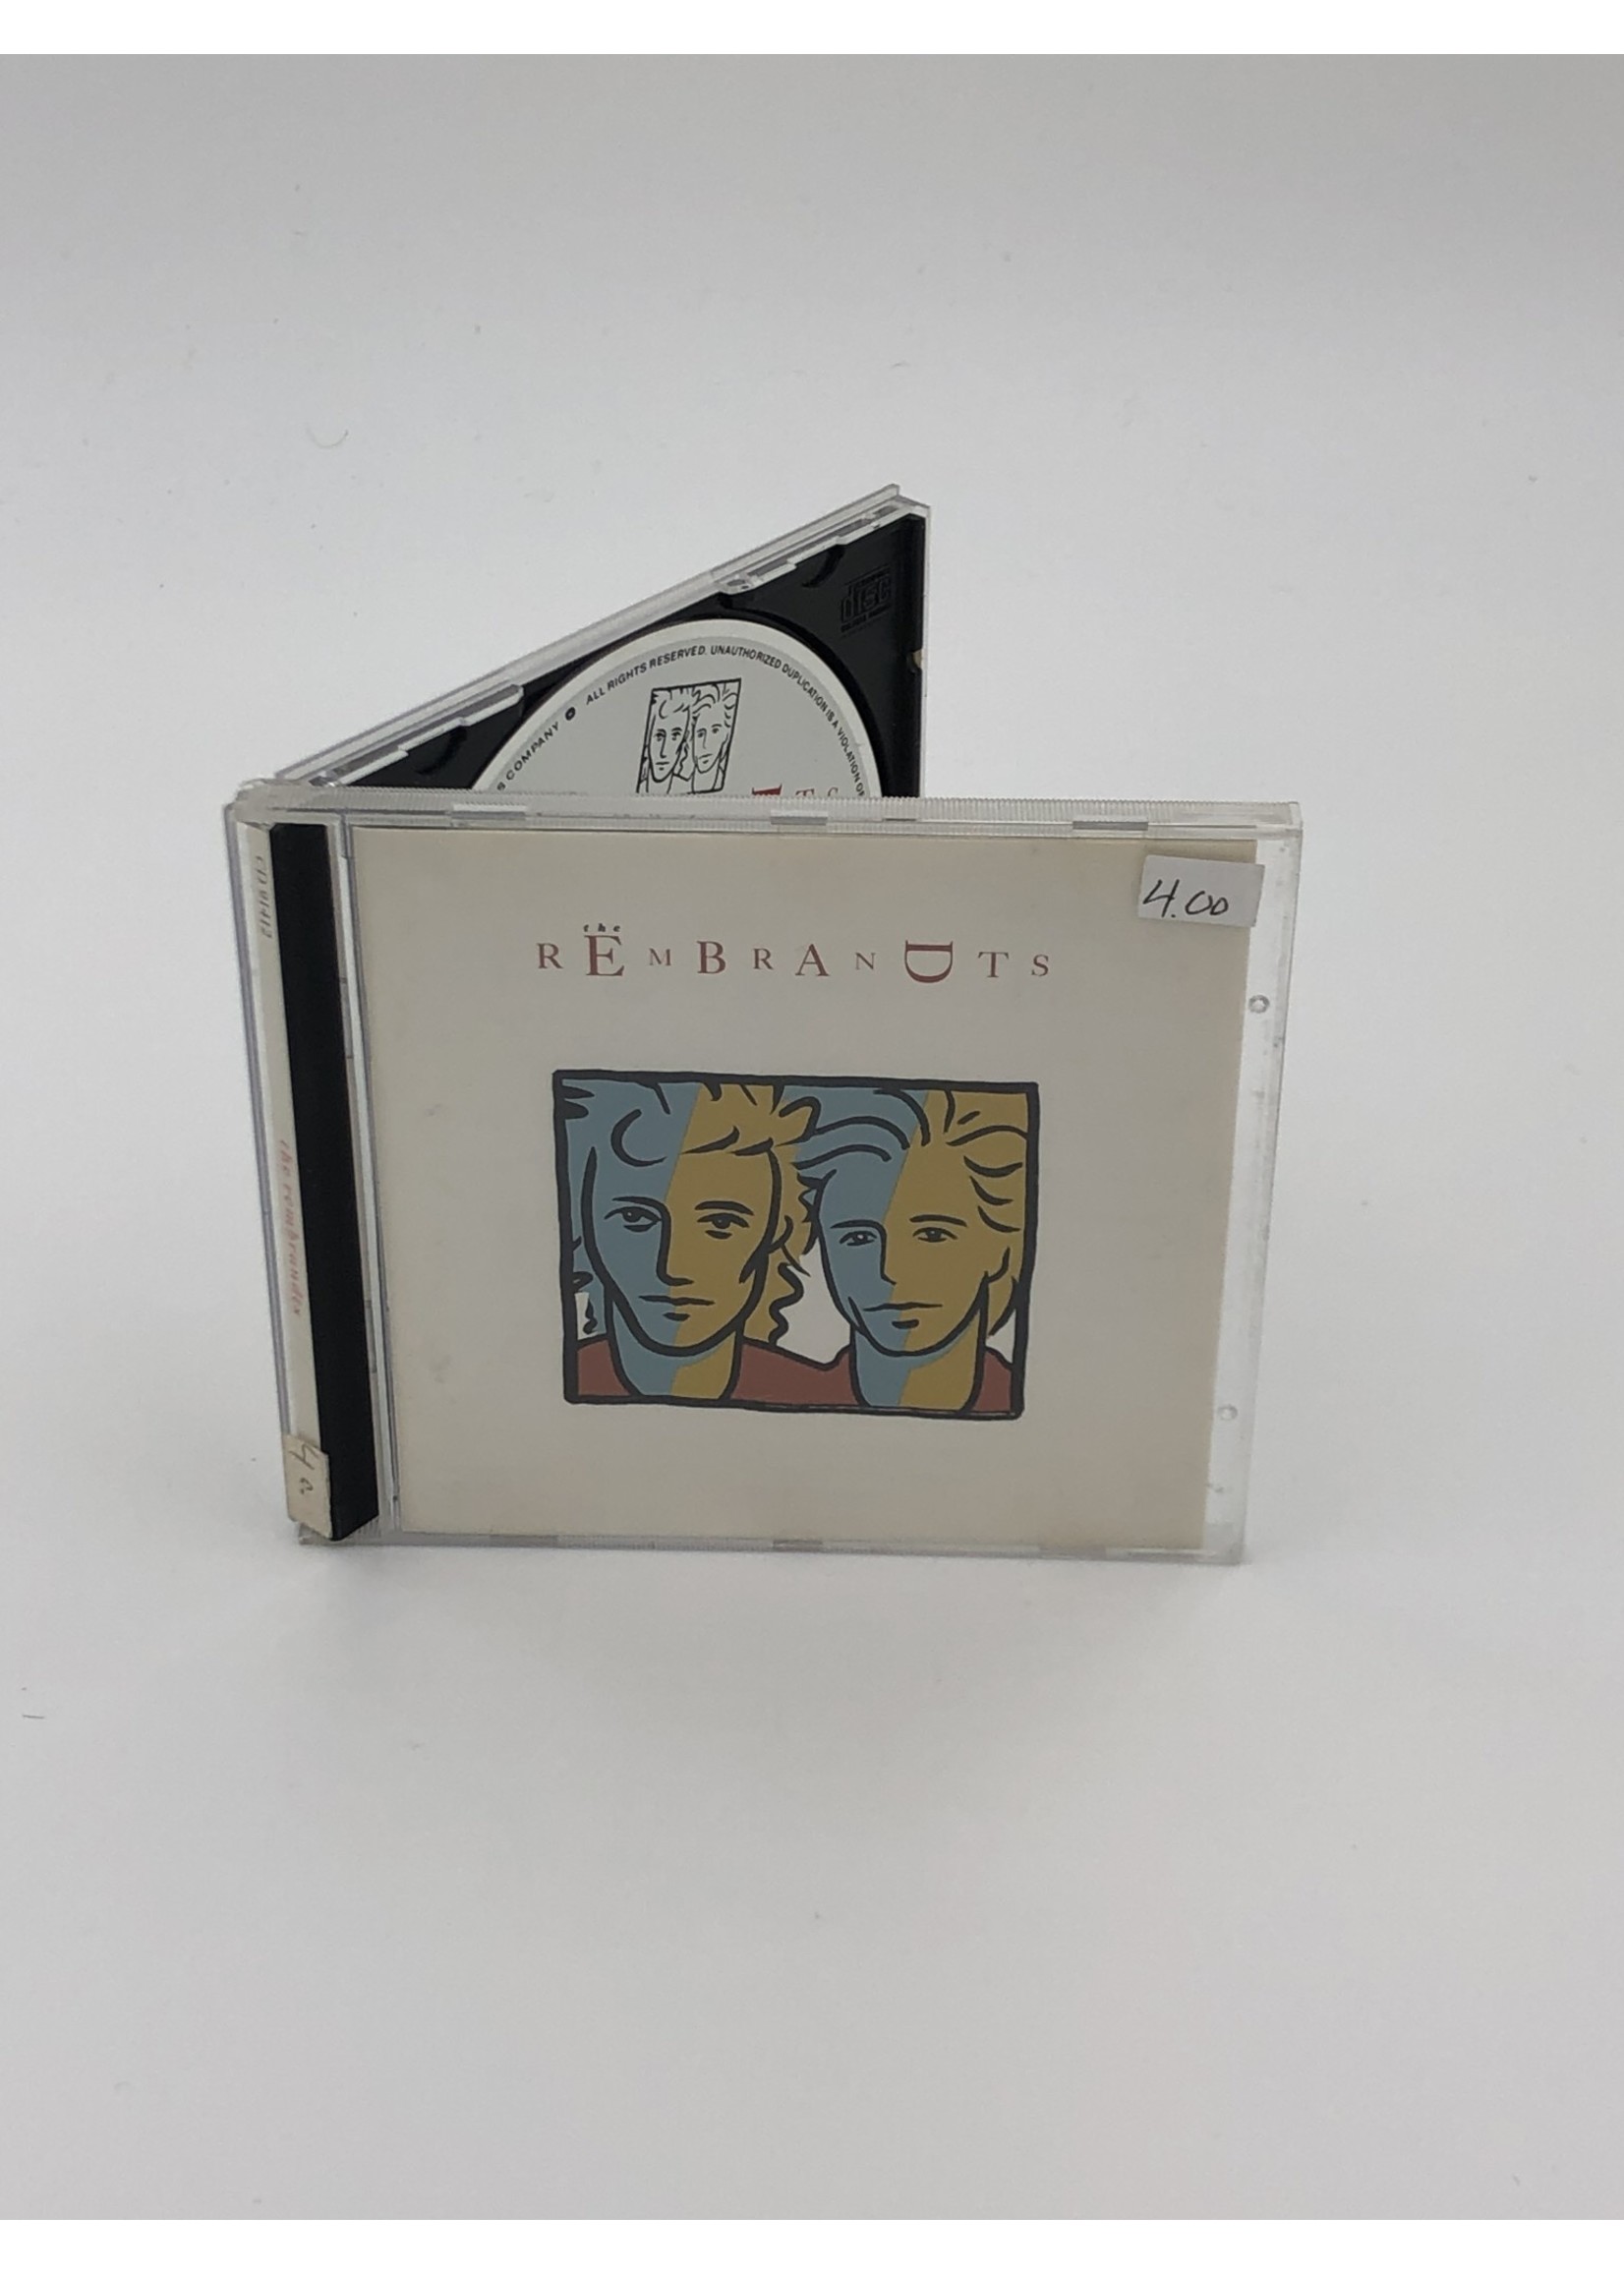 CD The Rembrandts: The Rembrandts CD